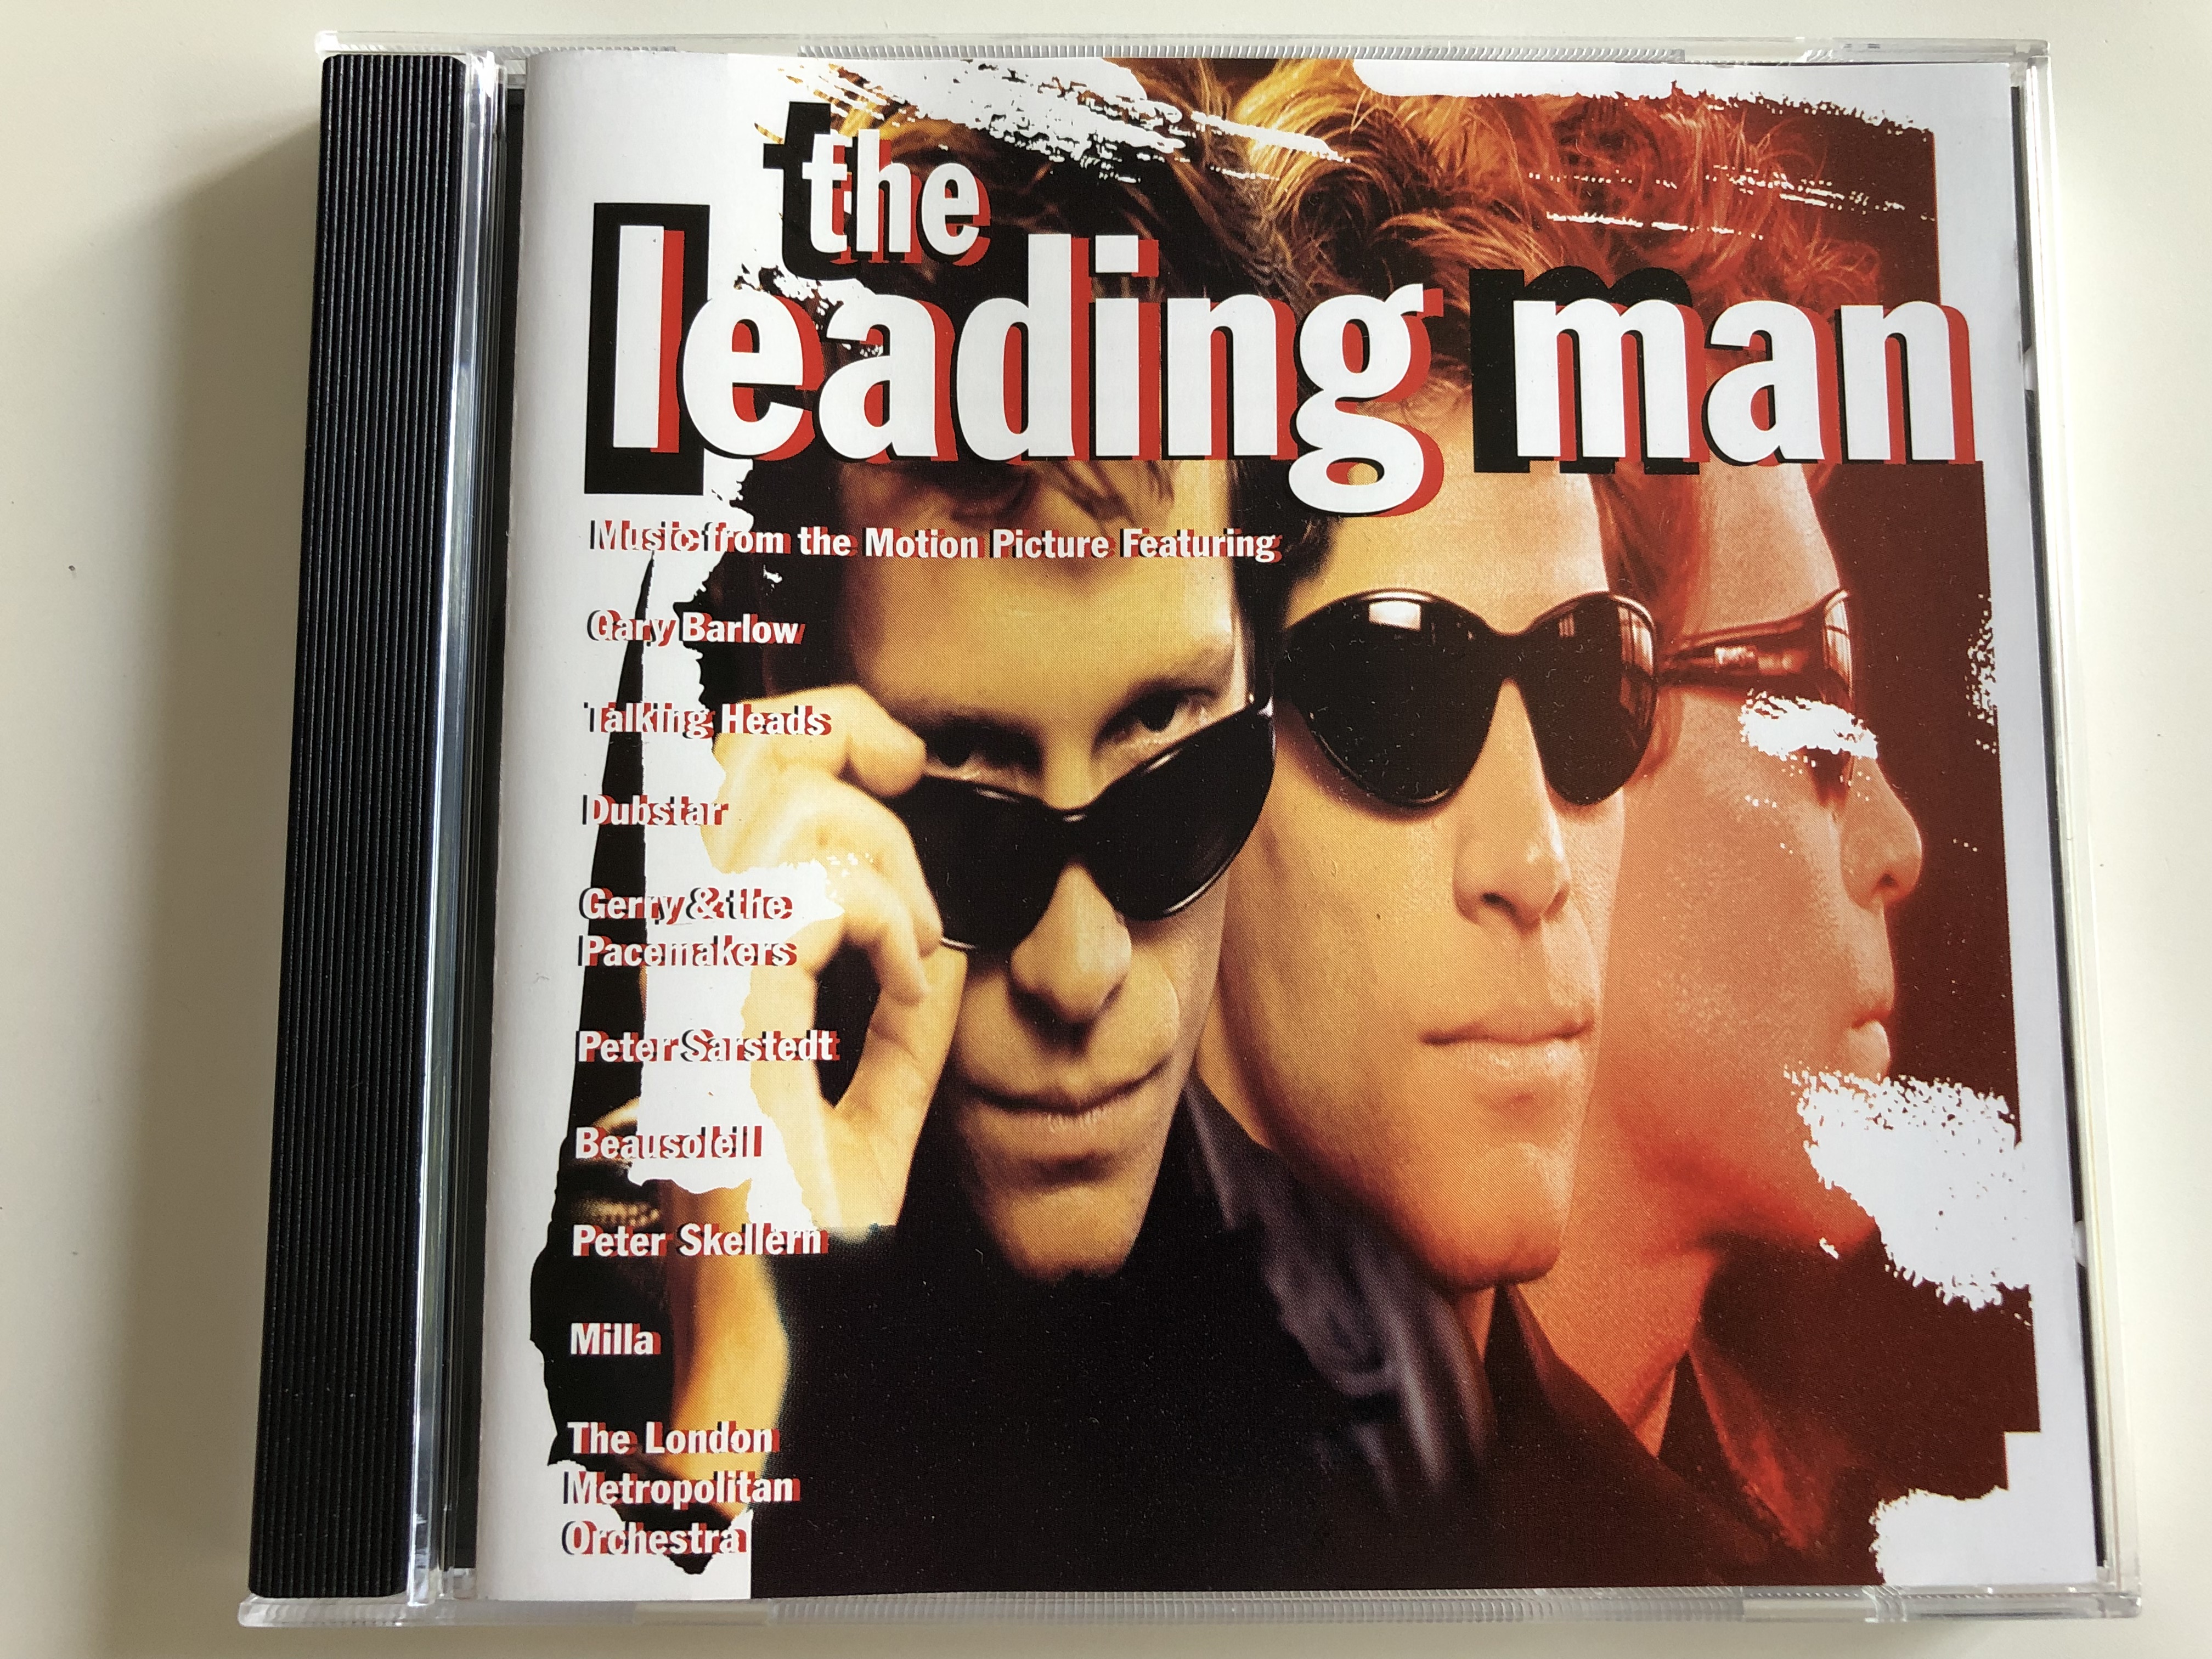 the-leading-man-music-from-the-motion-picture-featuring-gary-barlow-talking-heads-dubstar-beausoleil-peter-skellern-the-london-metropolitan-orchestra-audio-cd-1996-prmcd-23-emi-1-.jpg